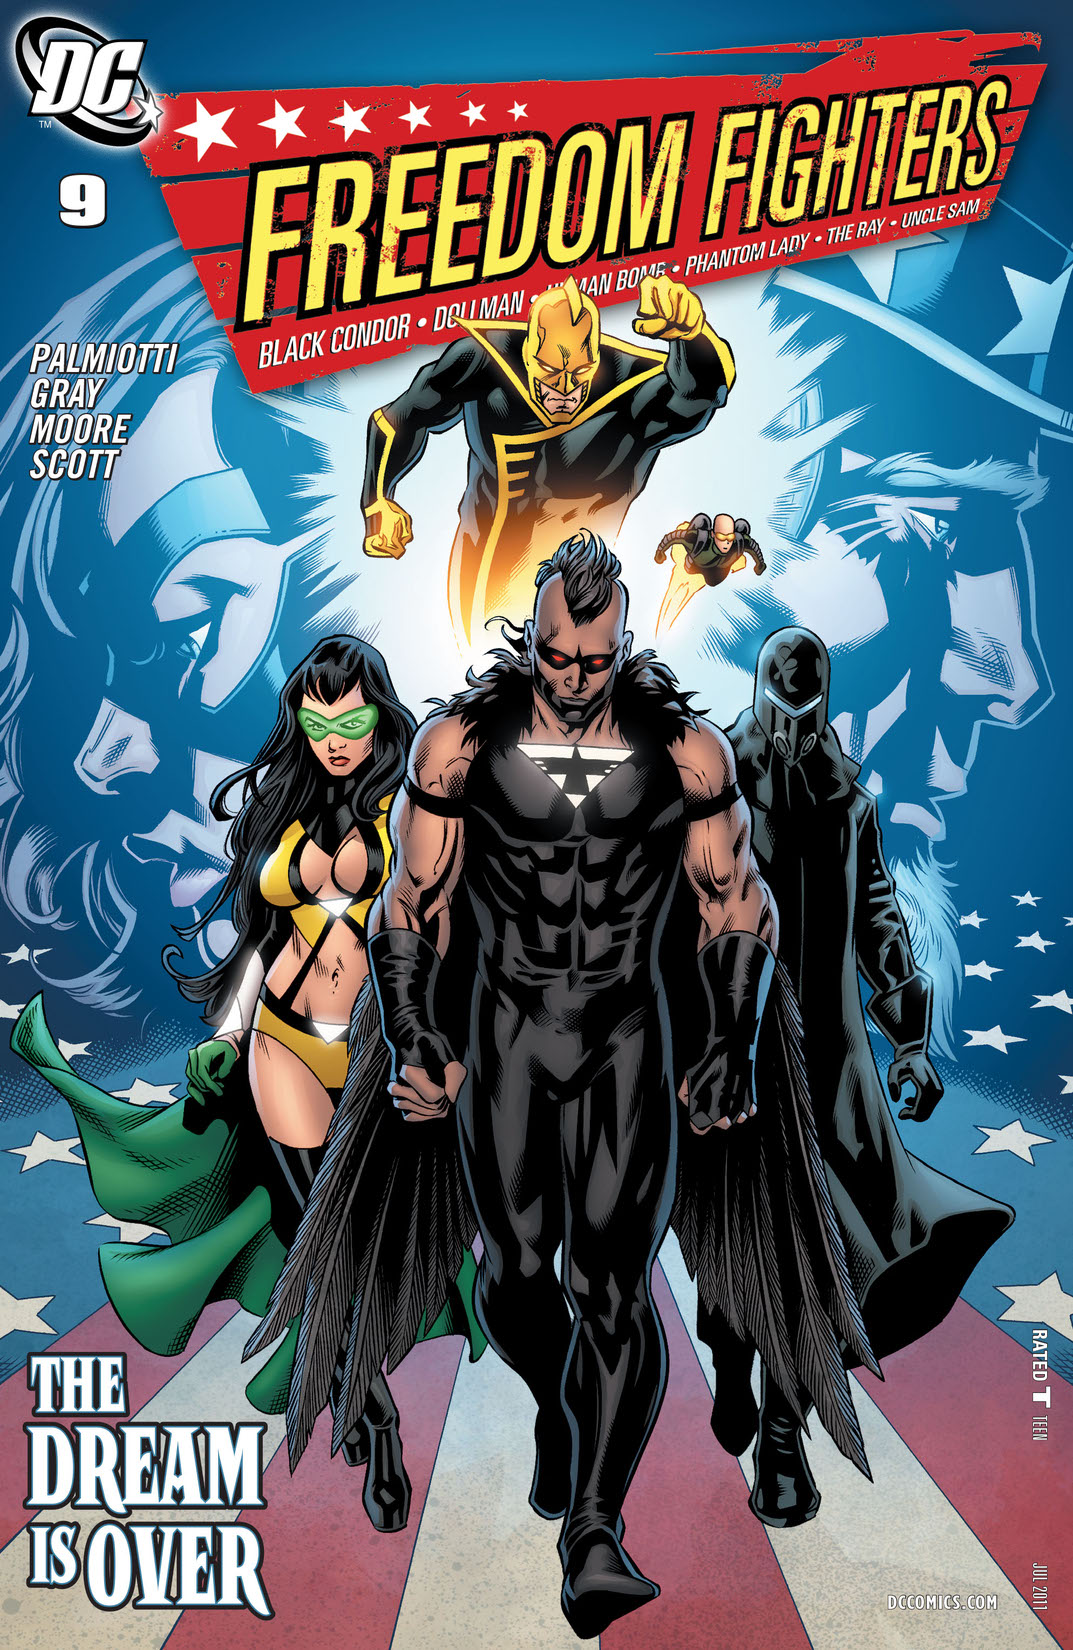 Freedom Fighters (2010-) #9 preview images